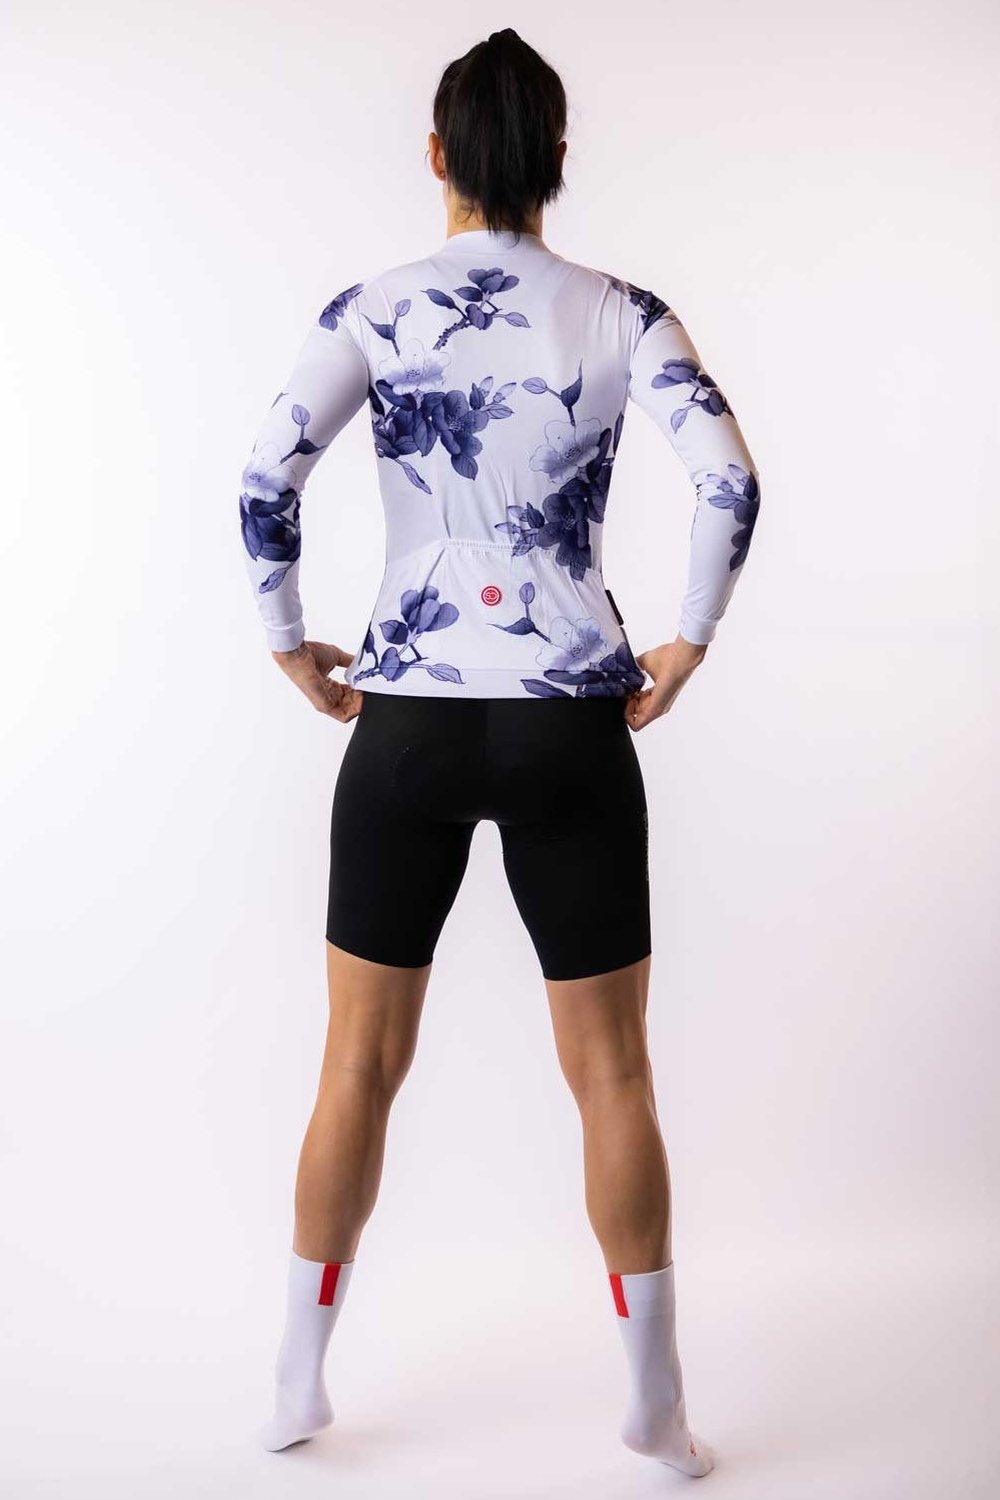 Sundried Floral Women's Long Sleeve Training Cycle Jersey Long Sleeve Jersey Activewear